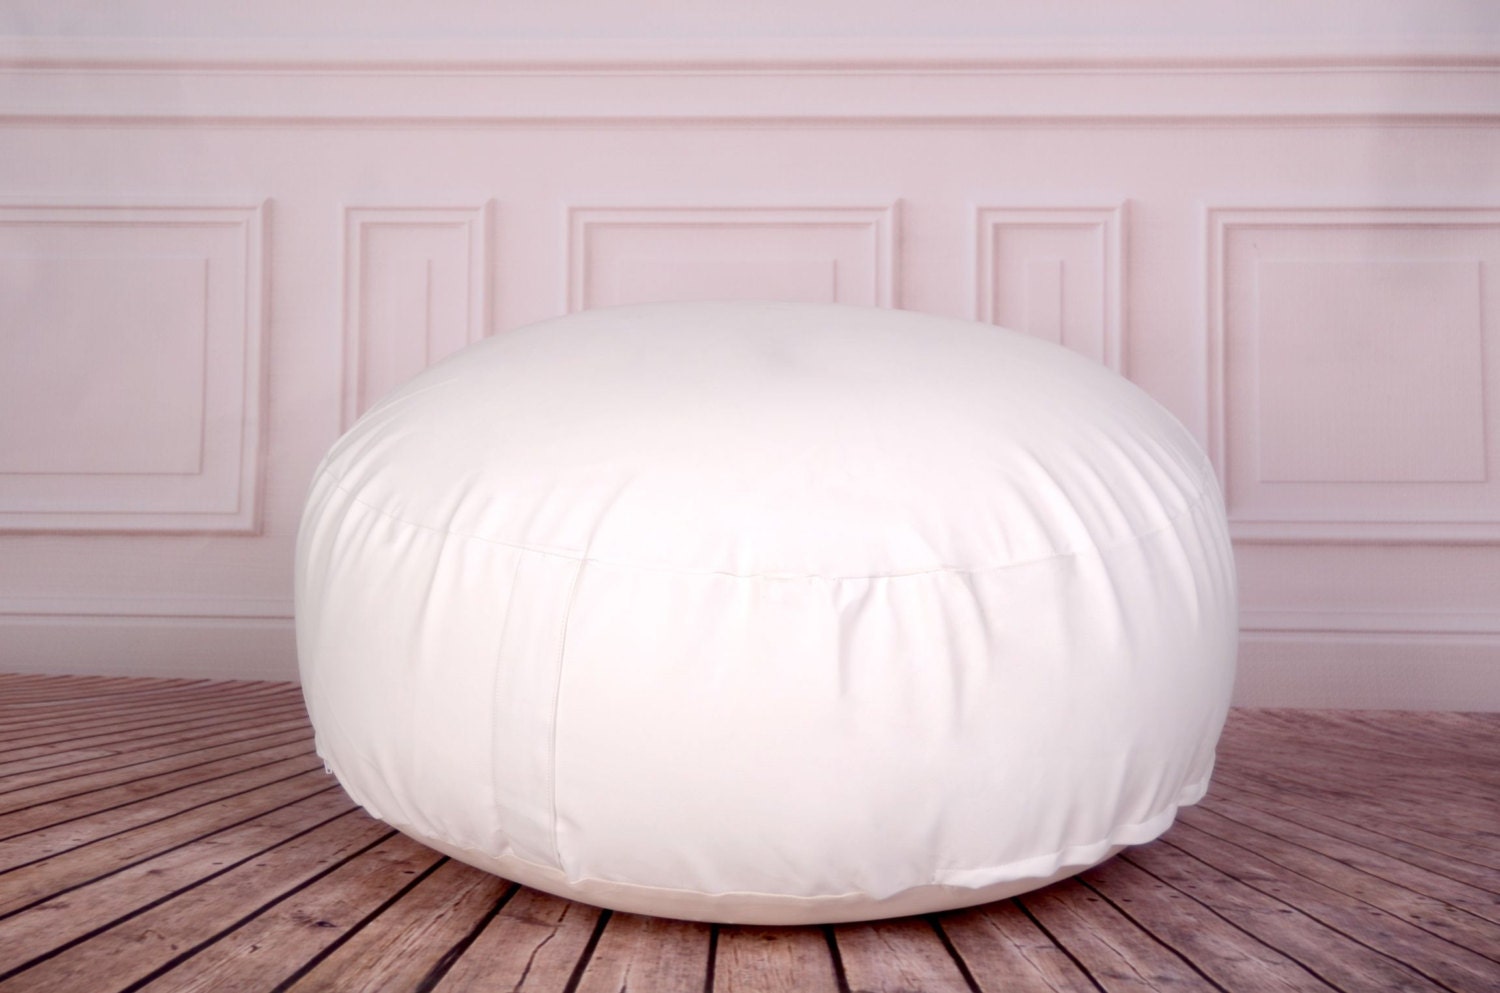 FREE DELIVERY - 100 Litre Bean Bag Refill Beans Polystyrene Beads